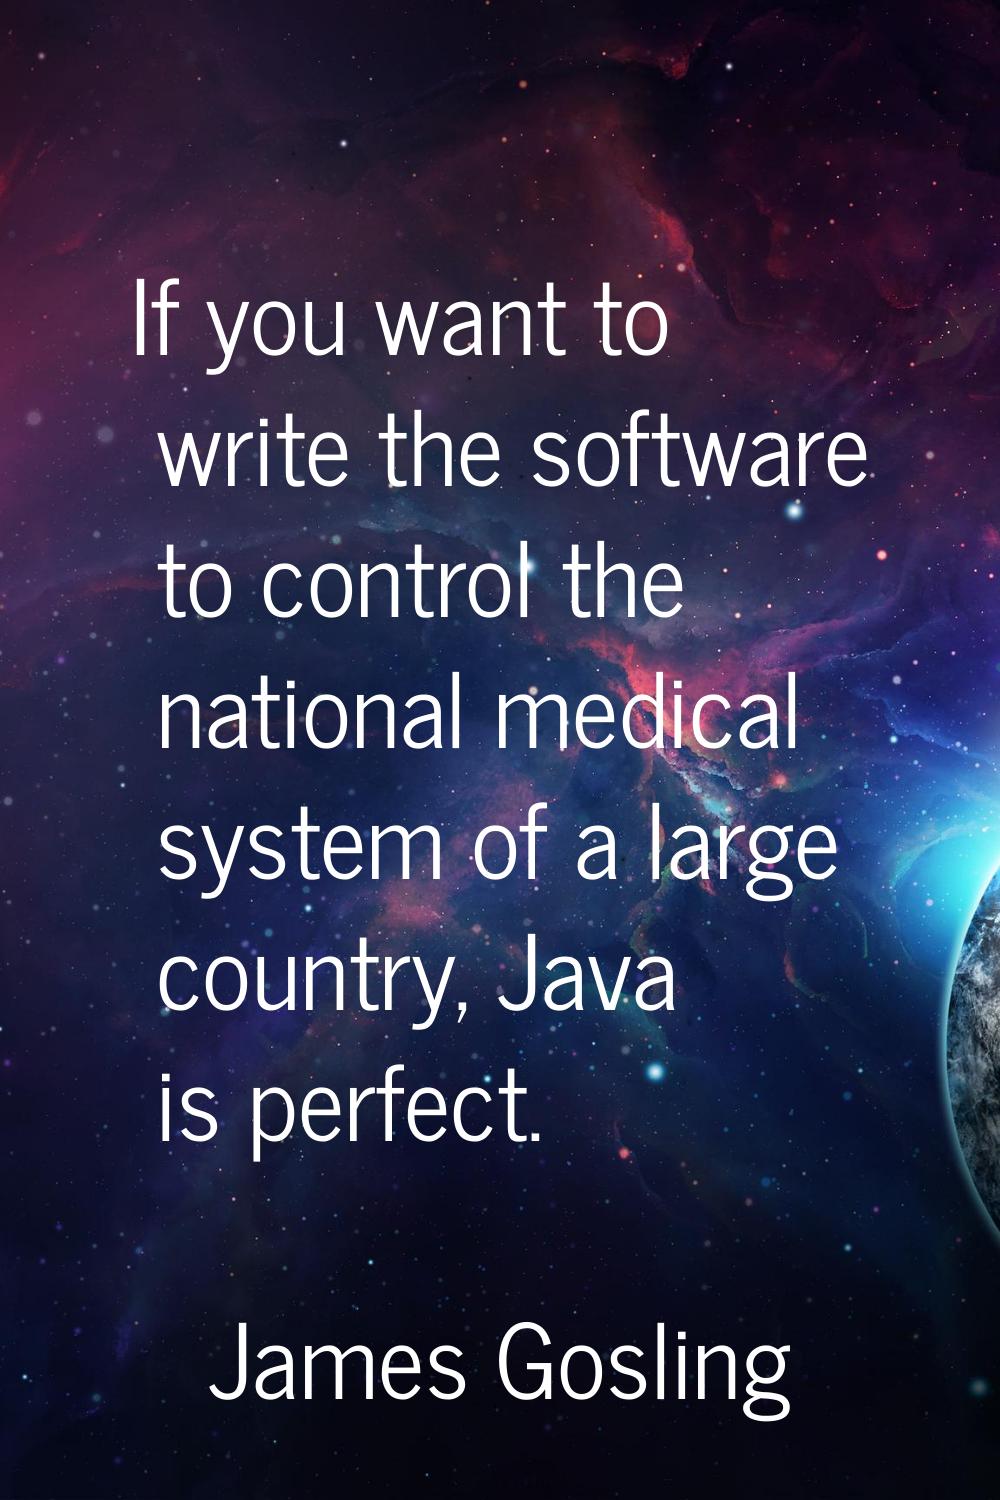 If you want to write the software to control the national medical system of a large country, Java i